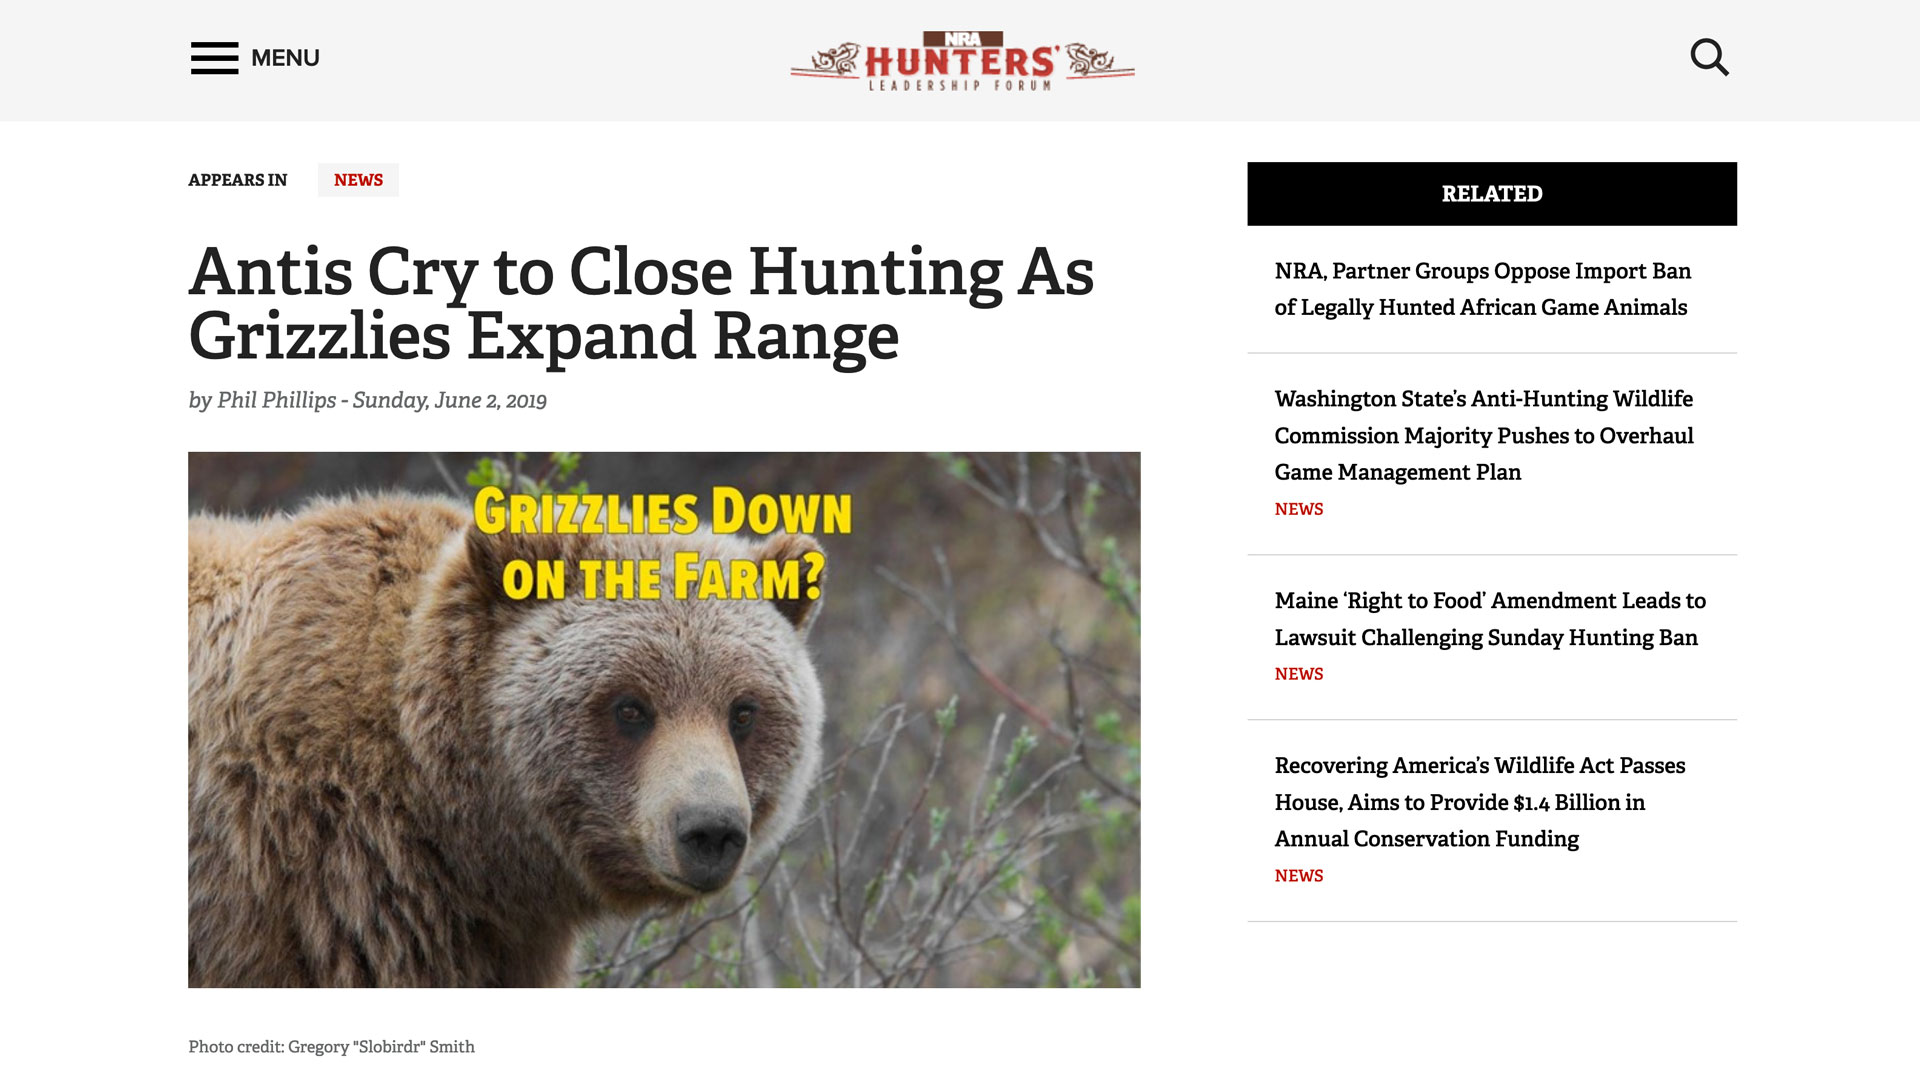 screen grab of nra hlf web page news story explaining anti hunter sentiment blocking grizzly hunt